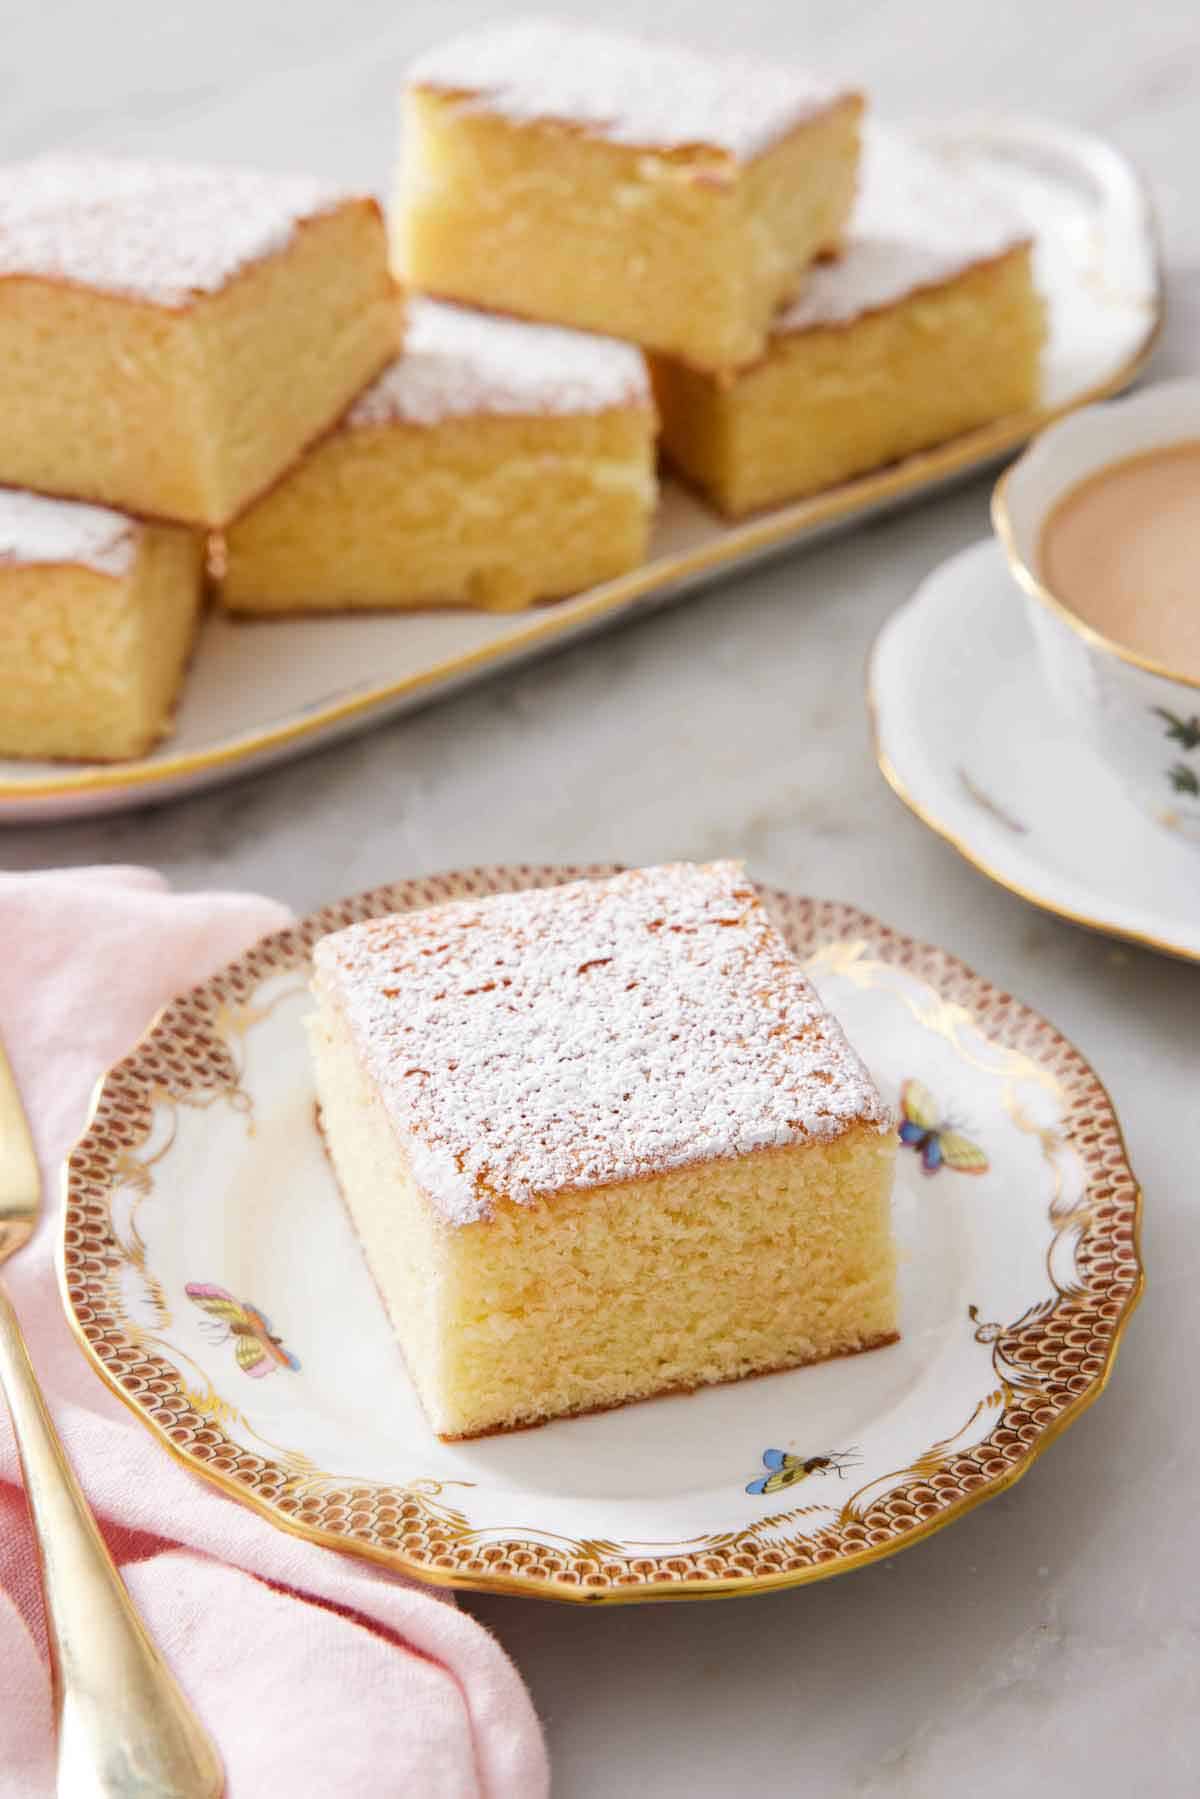 A slice of hot milk cake topped with a dusting of powdered sugar. A platter with more pieces in the back.